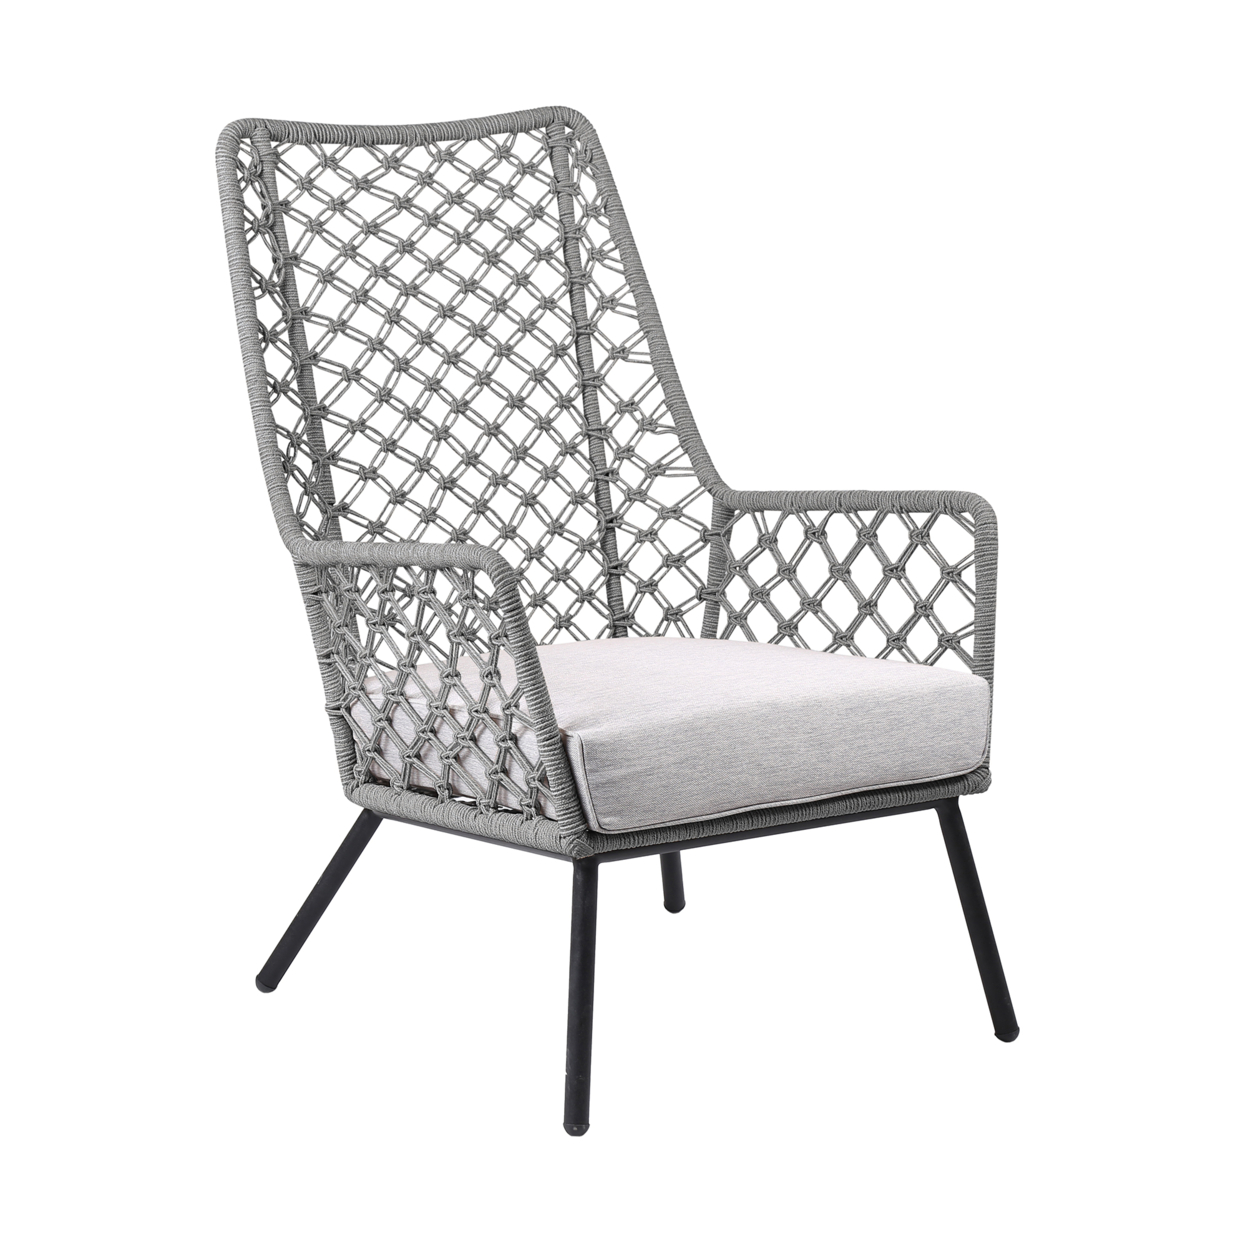 Indoor Outdoor Lounge Chair With Intricate Woven Lattice Back, Gray- Saltoro Sherpi